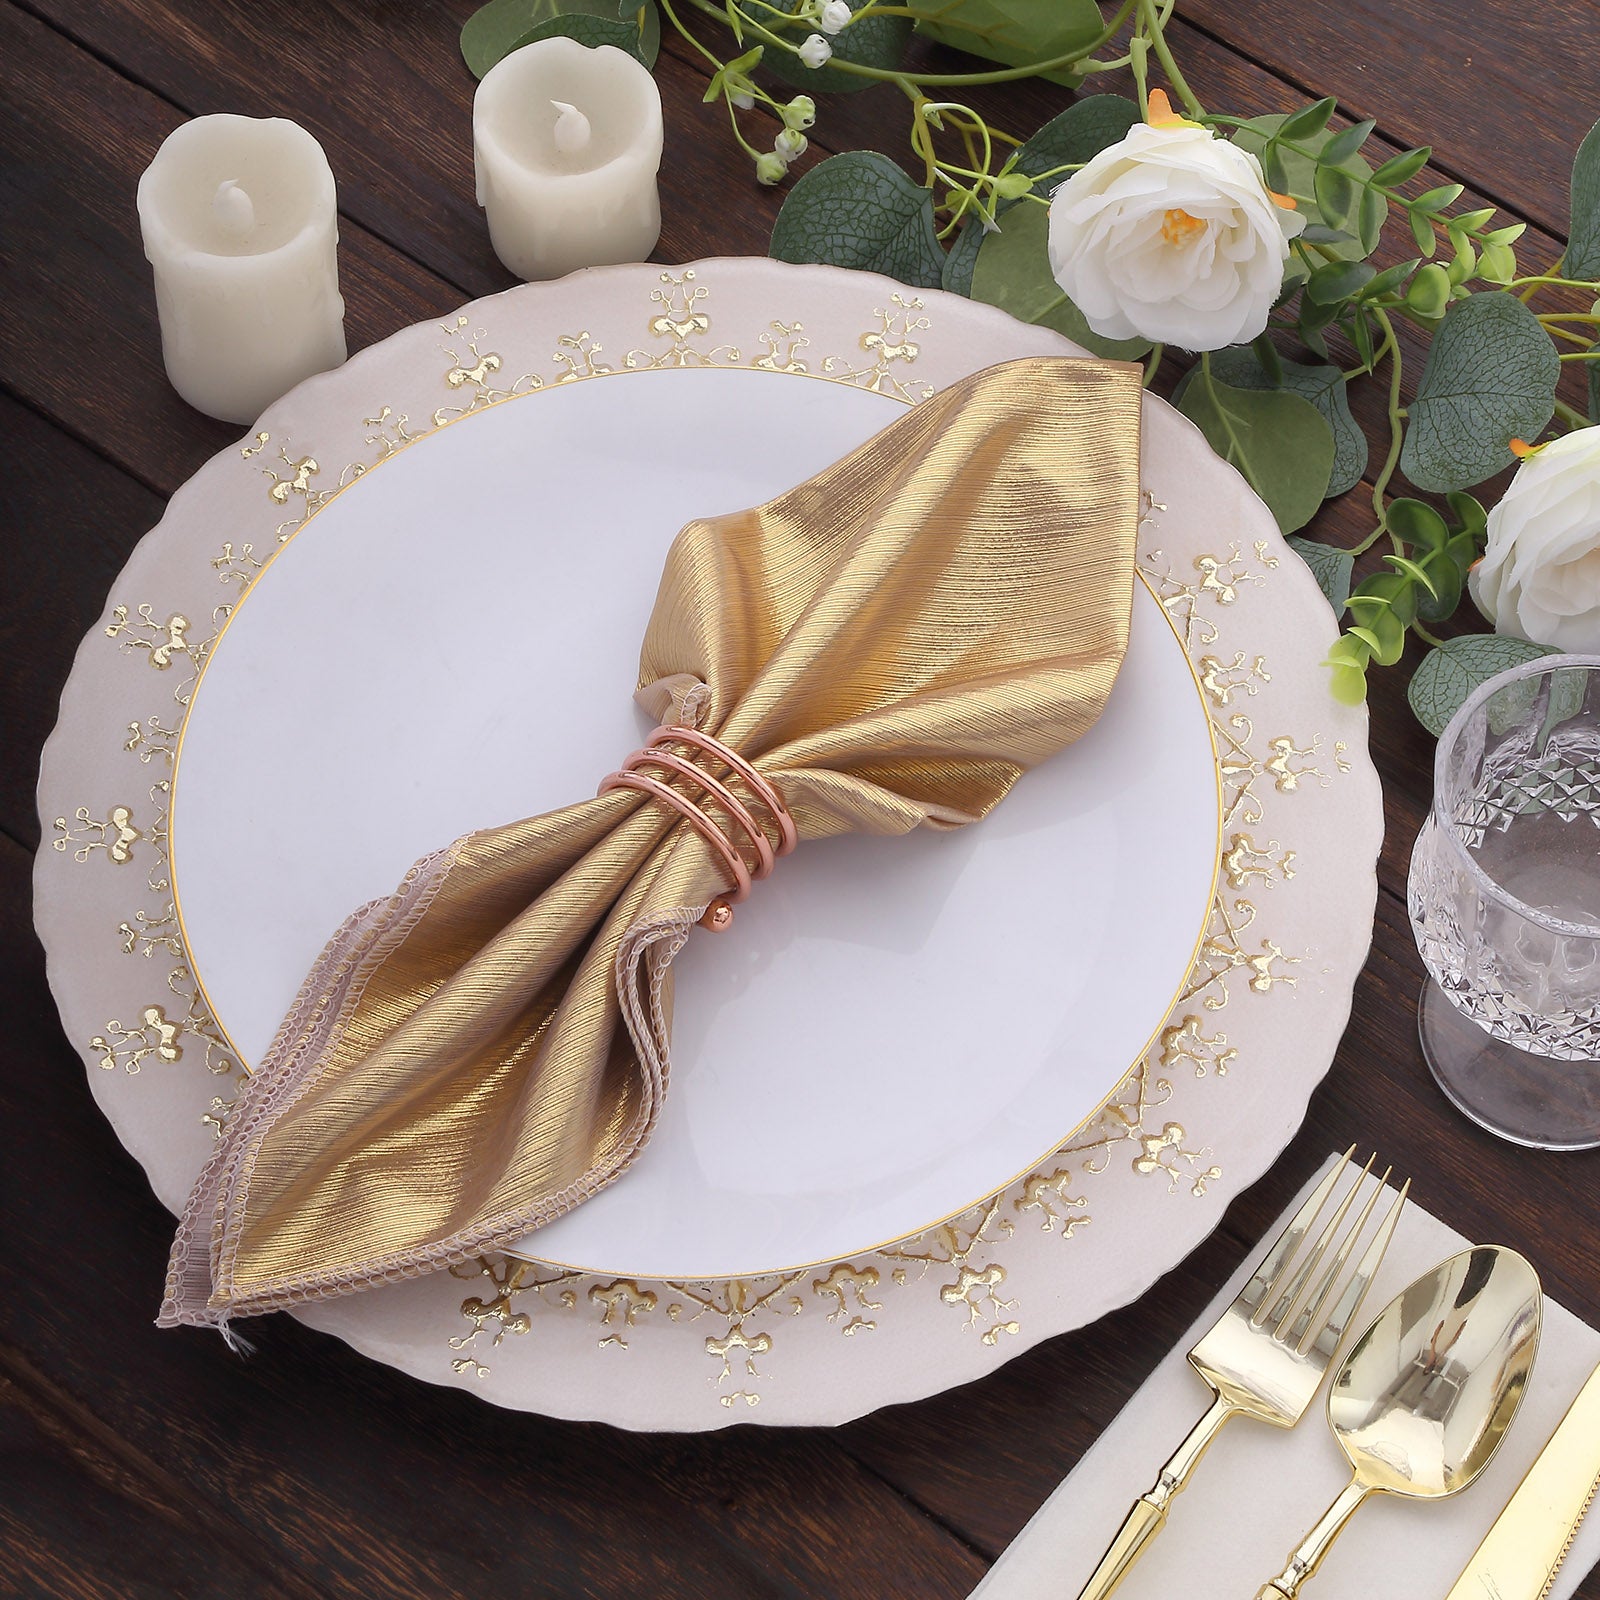 5 Premium Polyester 20x20 in Dinner Table Cloth Napkins